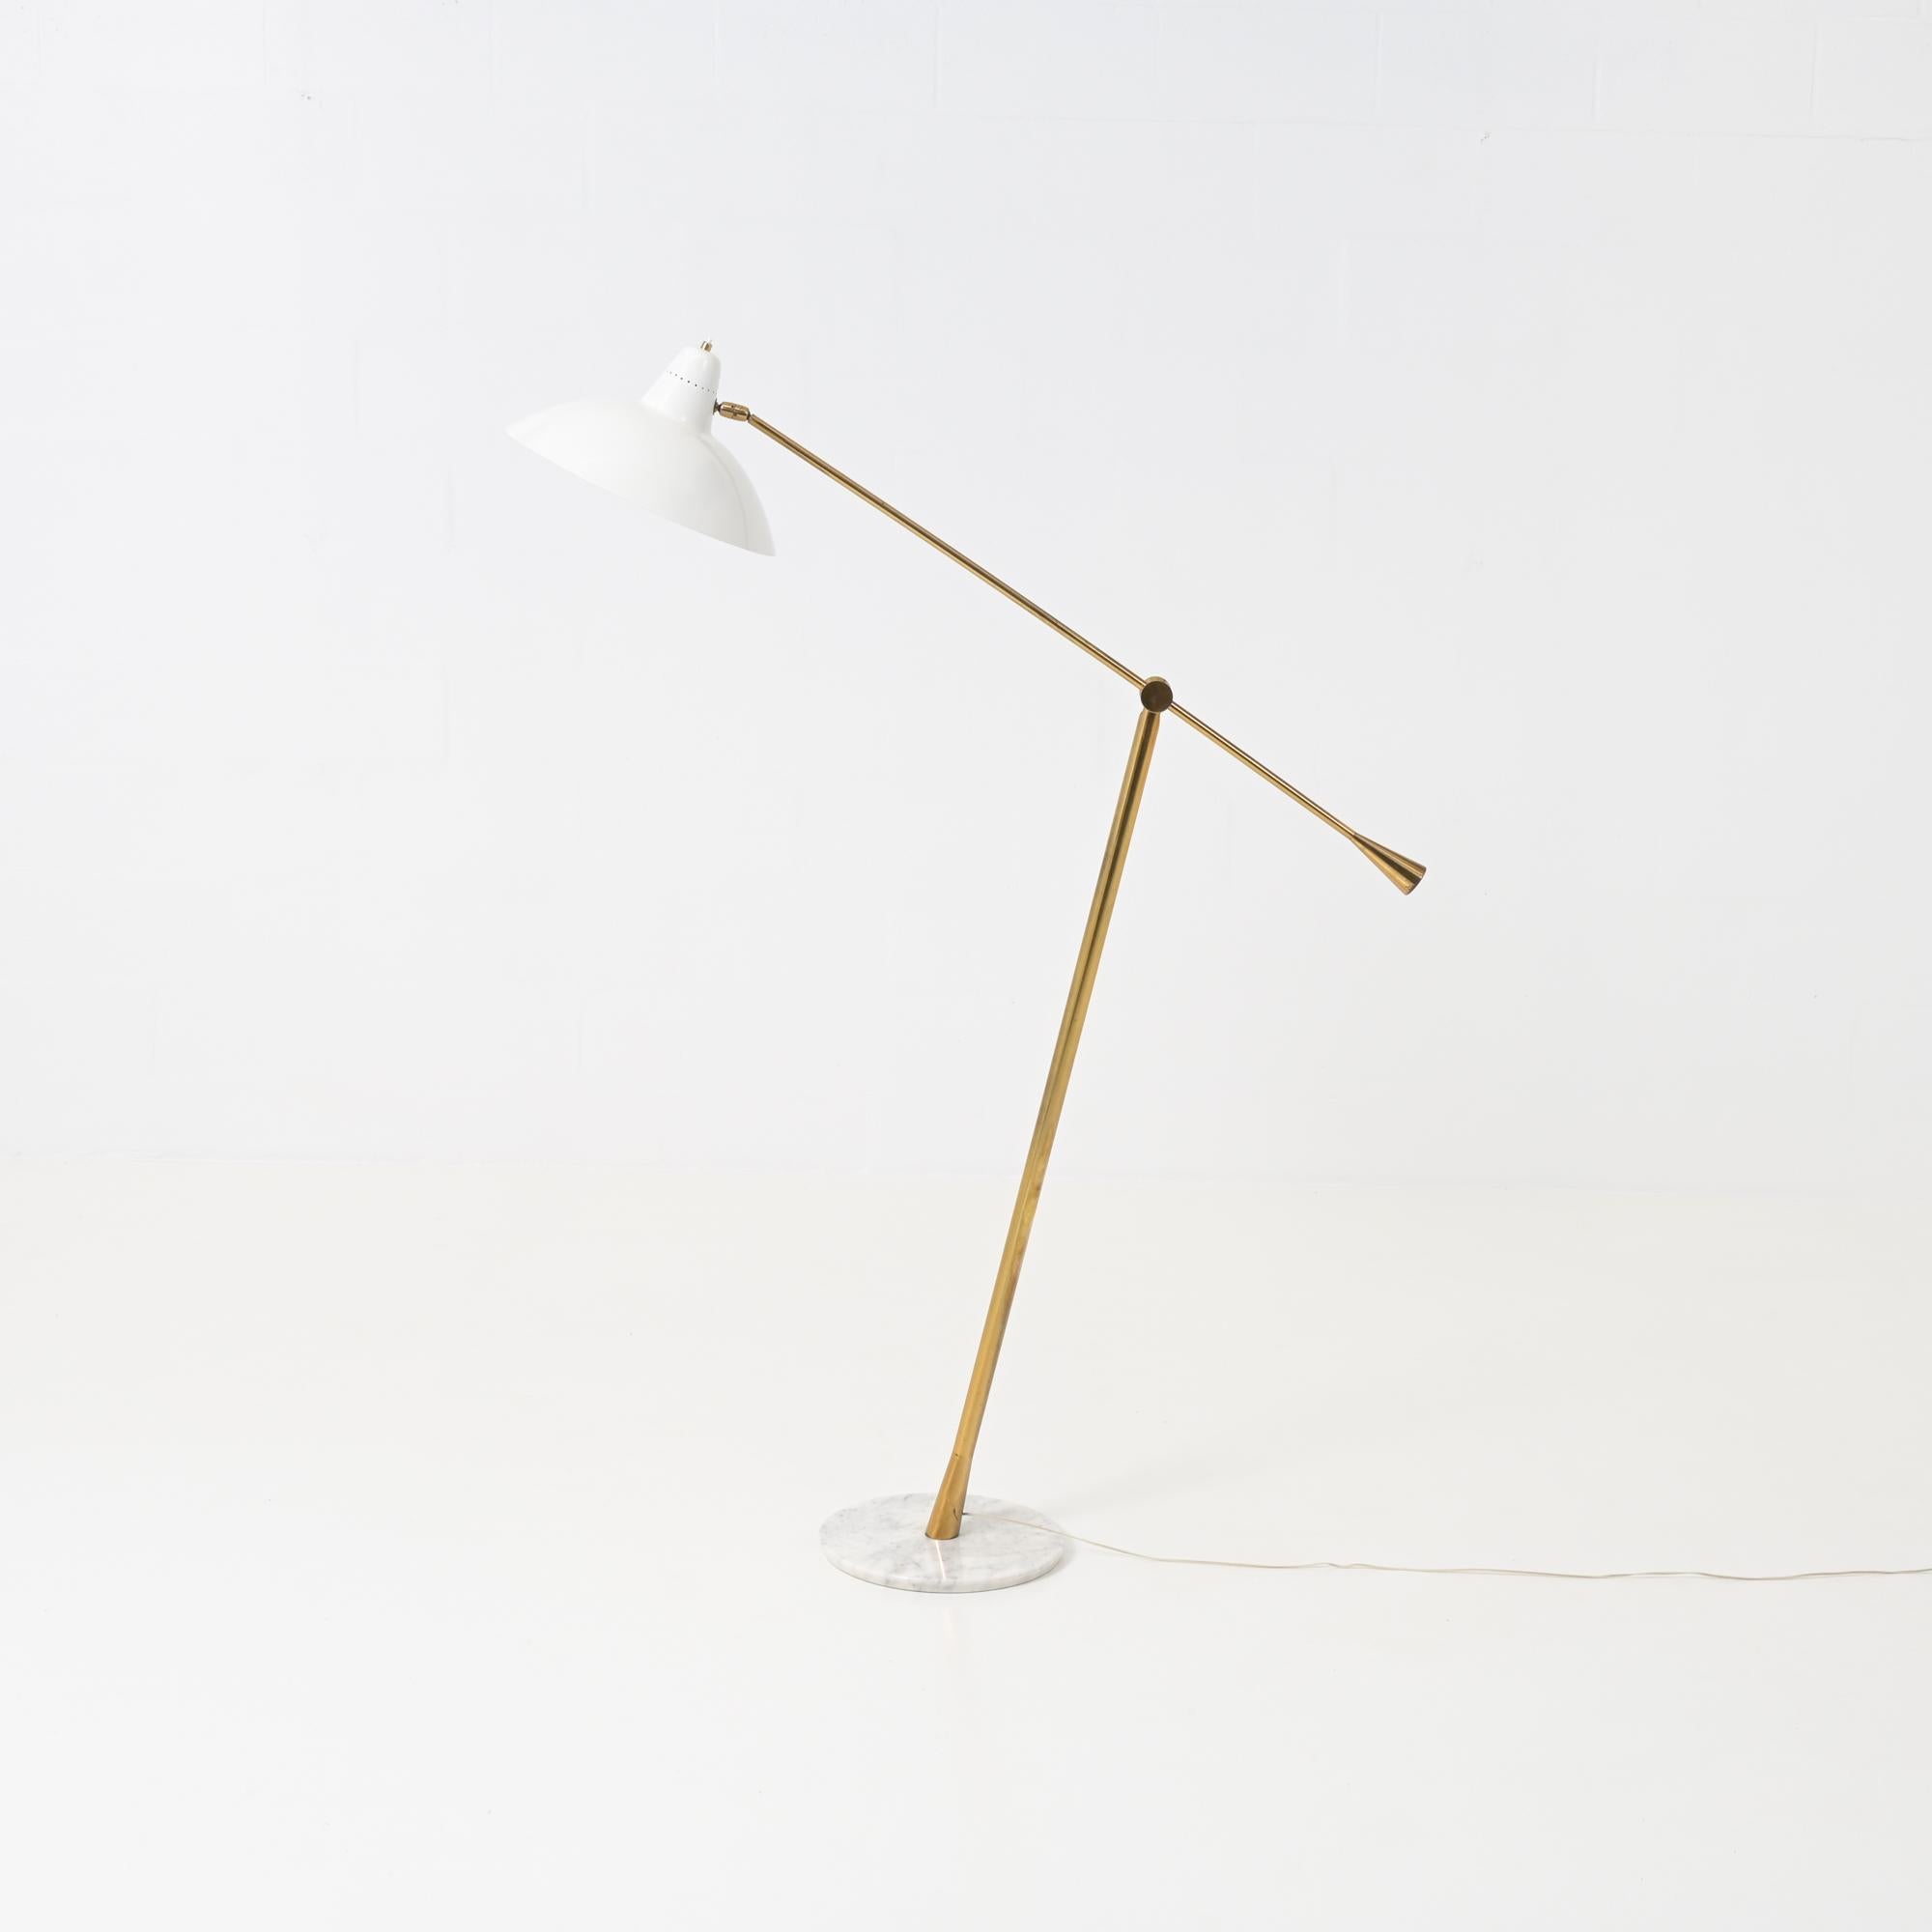 Very nice and typical Italian shaped floor lamp by Stilnovo, Italy 1950.

The floor lamp has a round white marble base and a brass arm with counterweight for the balance. The shade is broken white painted. This lamp can be used as a reading lamp and